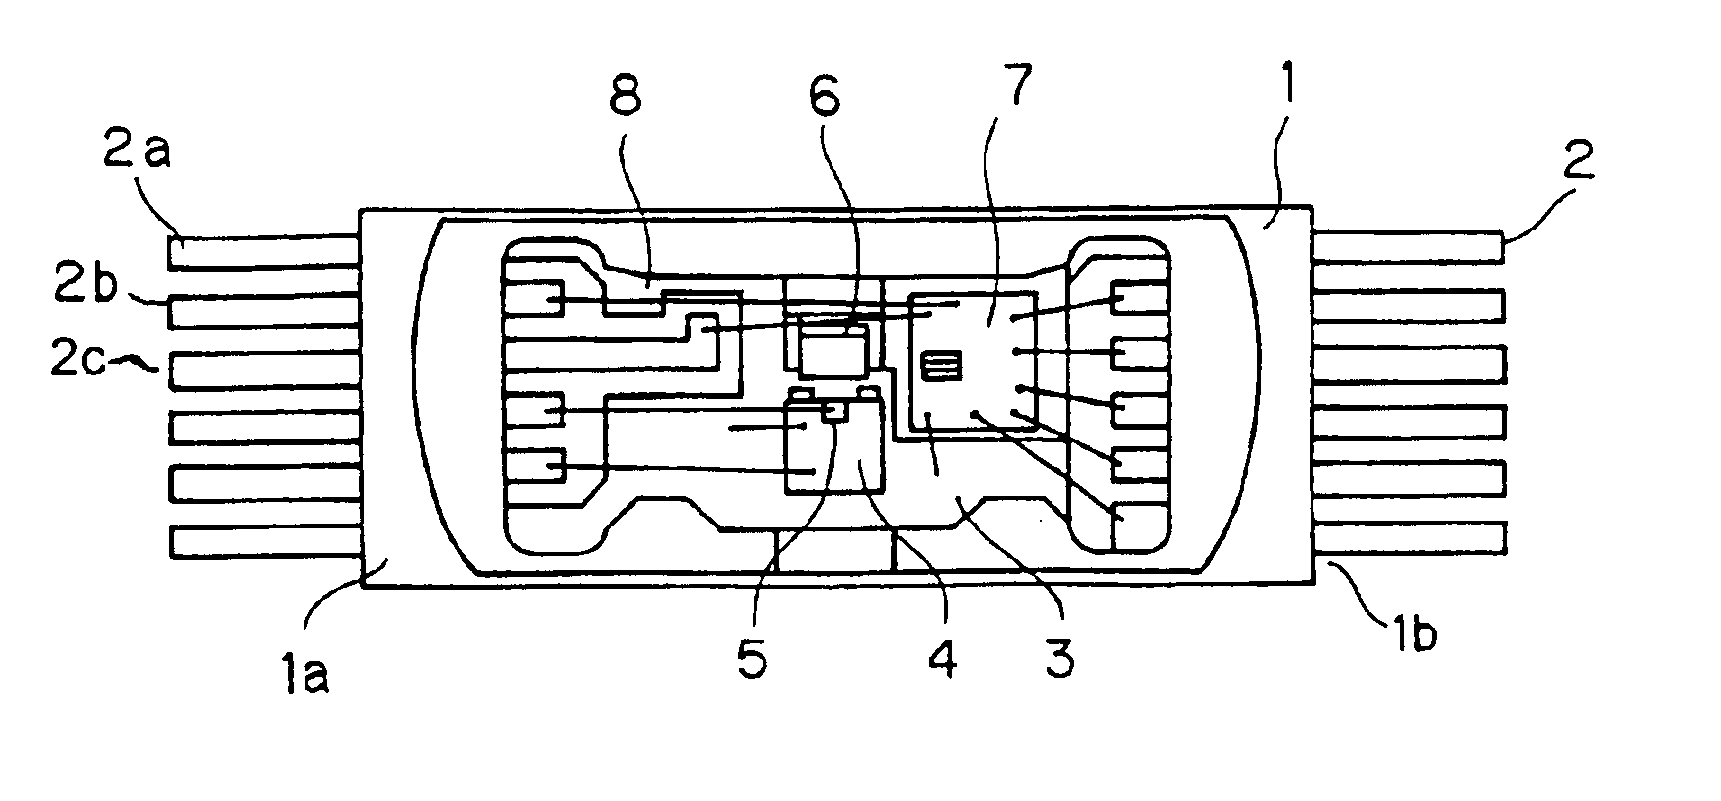 Semiconductor laser device, method of fabricating the same, and optical pickup employing the same